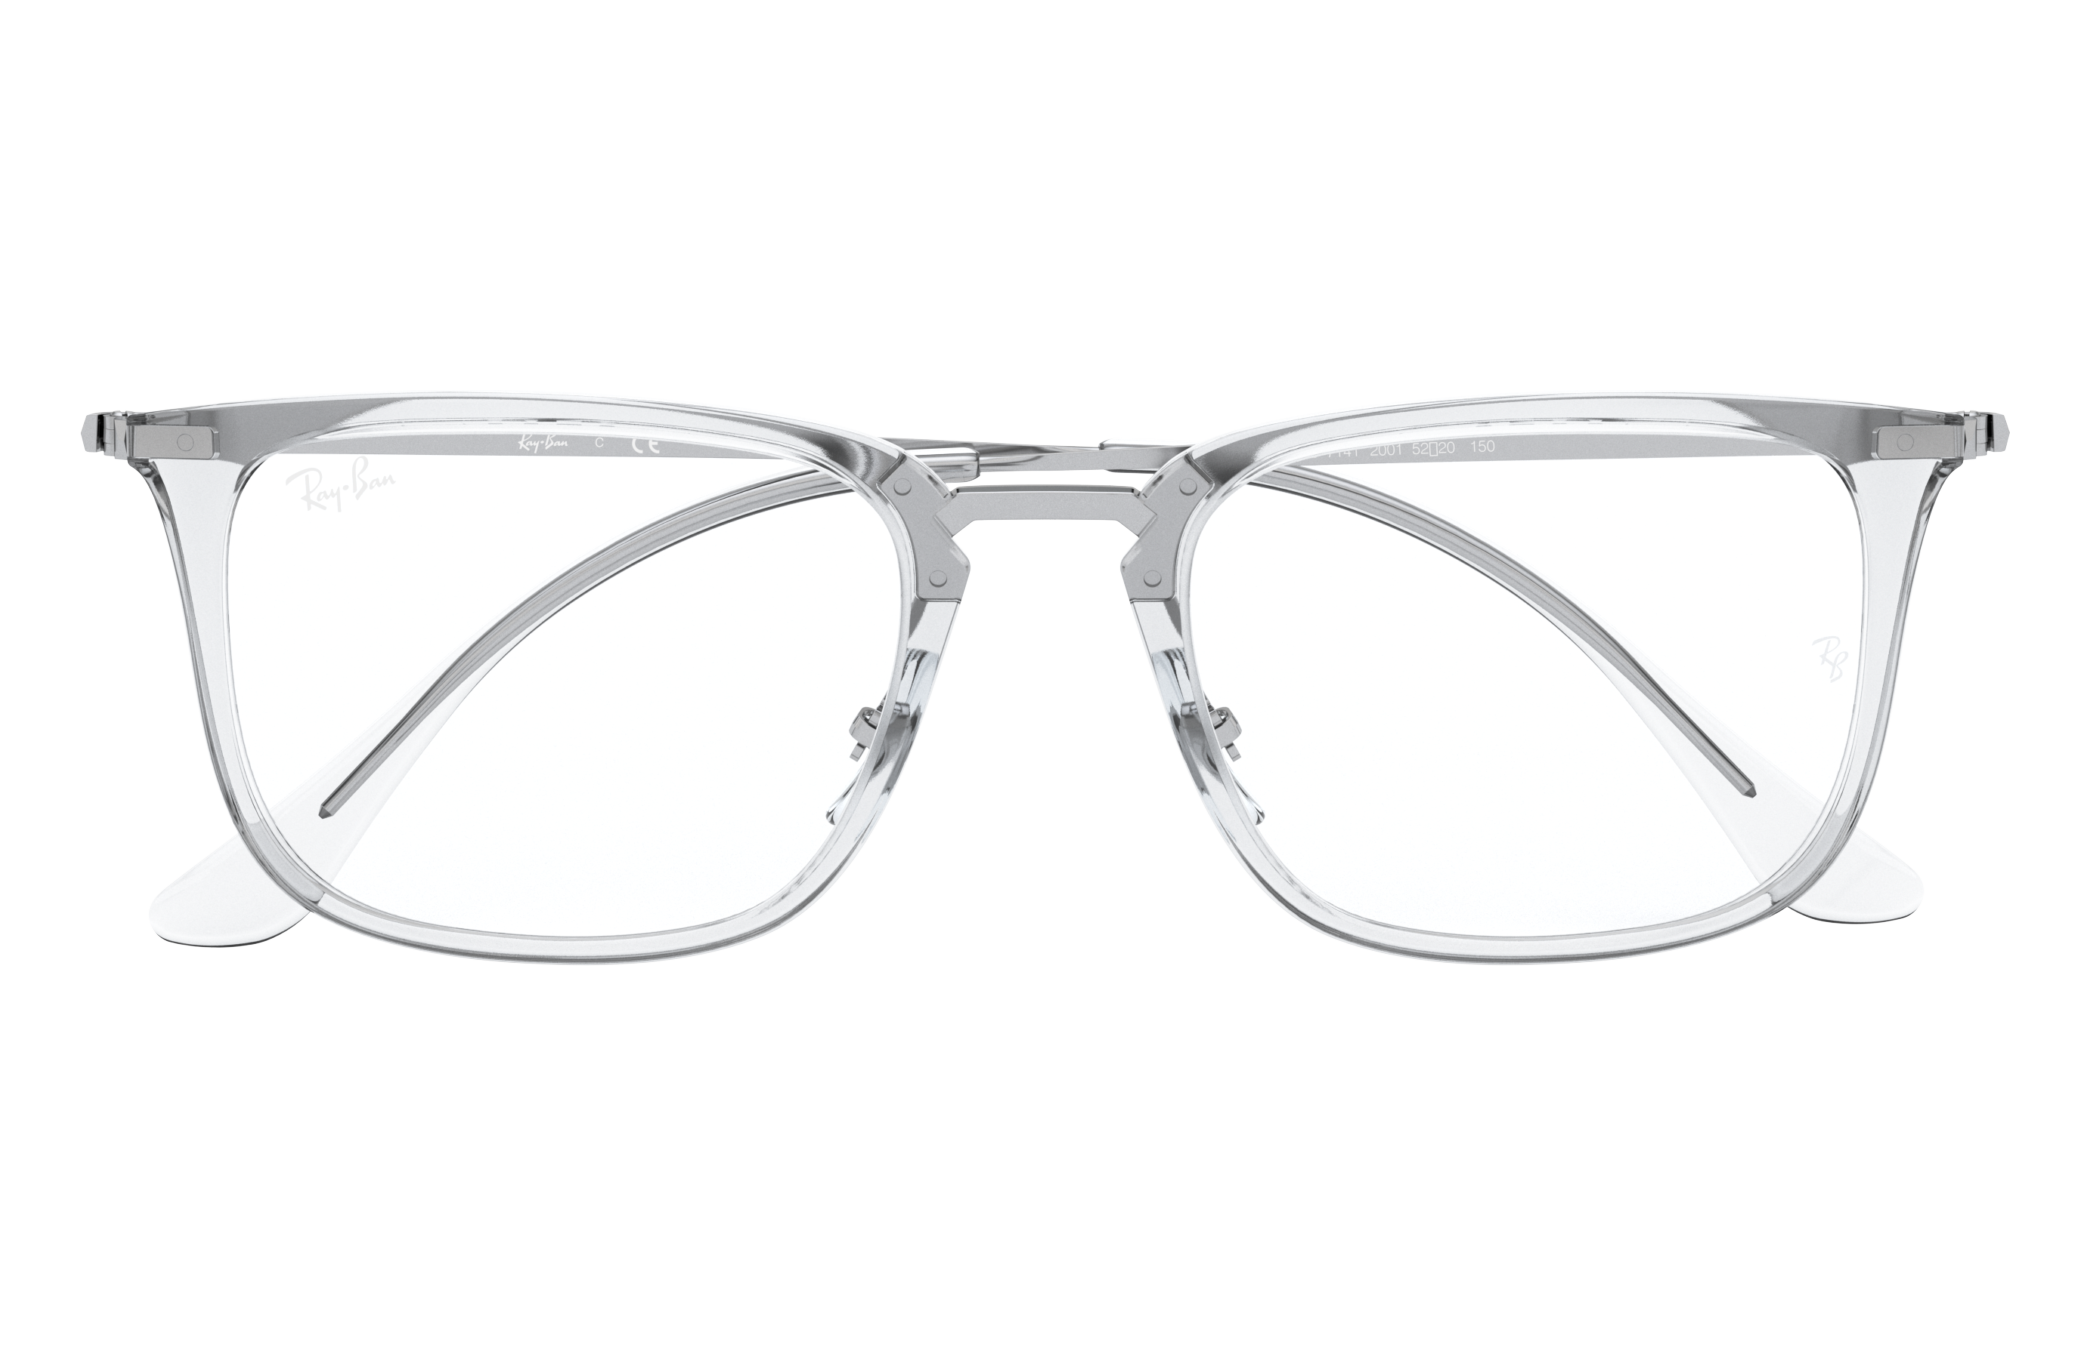 Rb7141 Eyeglasses with Transparent Frame | Ray-Ban®